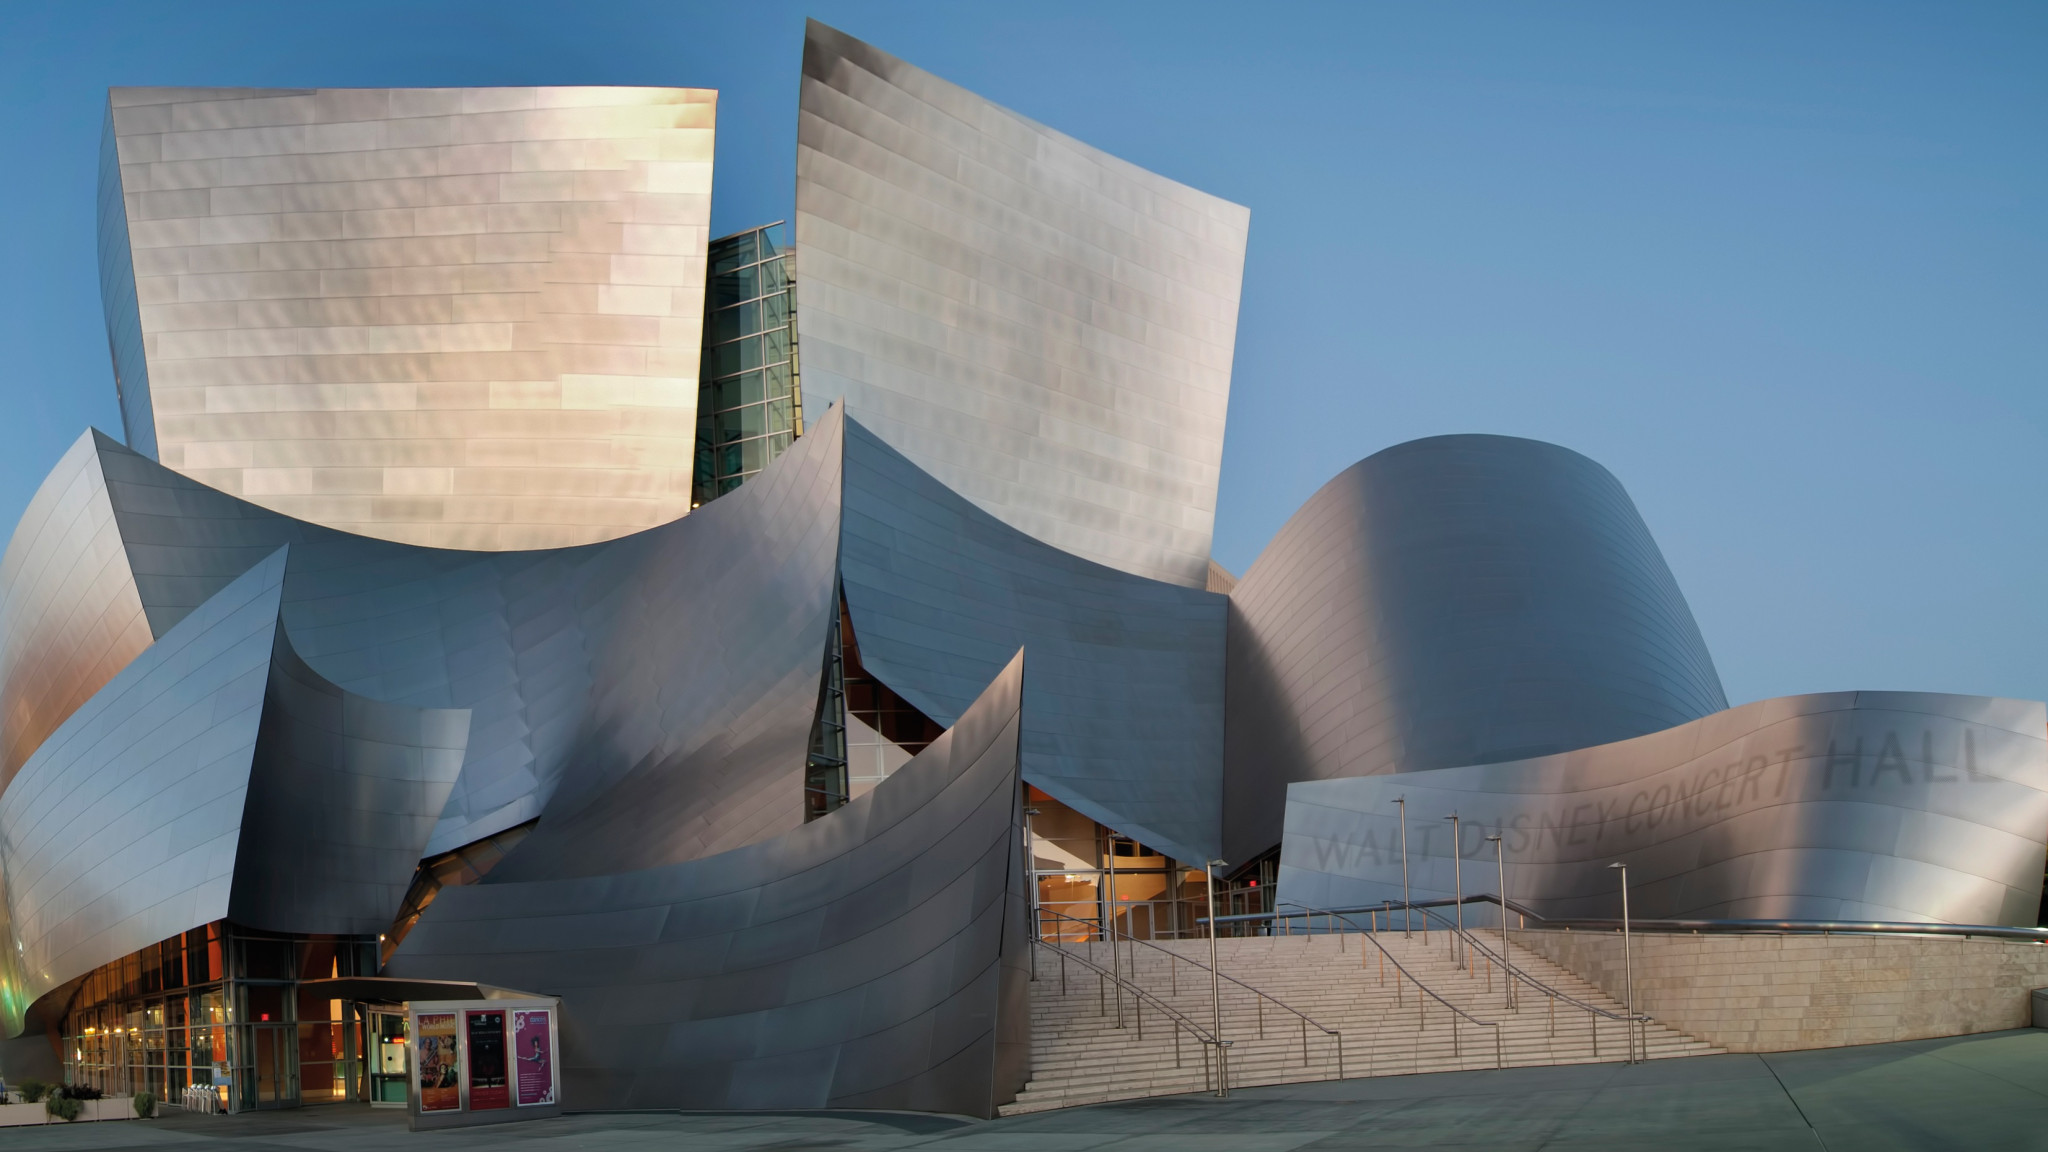 A New Partnership with Gustavo Dudamel and the LA Phil